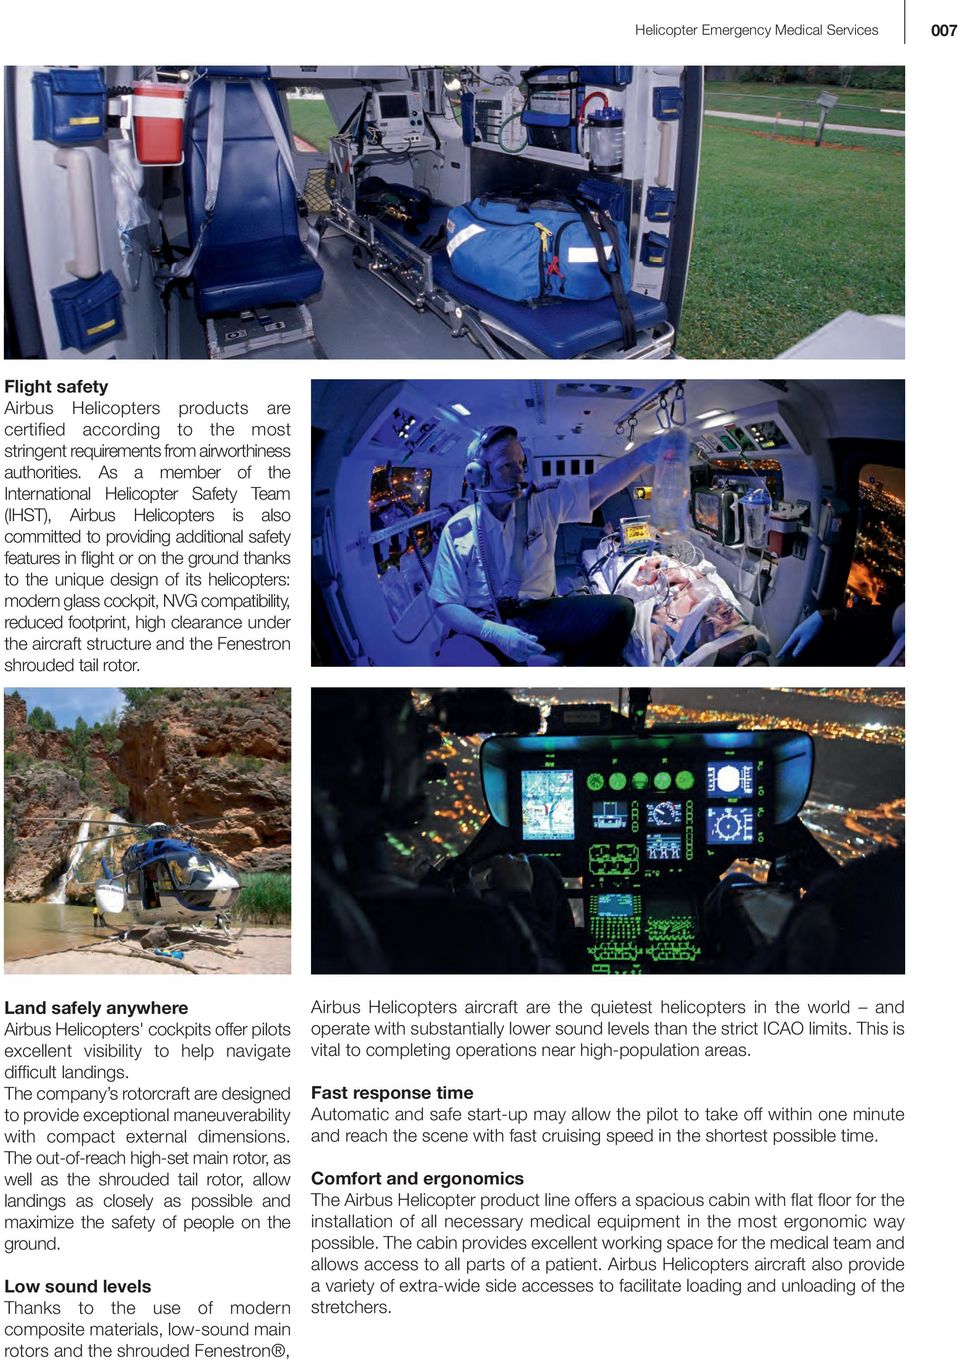 its helicopters: modern glass cockpit, NVG compatibility, reduced footprint, high clearance under the aircraft structure and the Fenestron shrouded tail rotor.